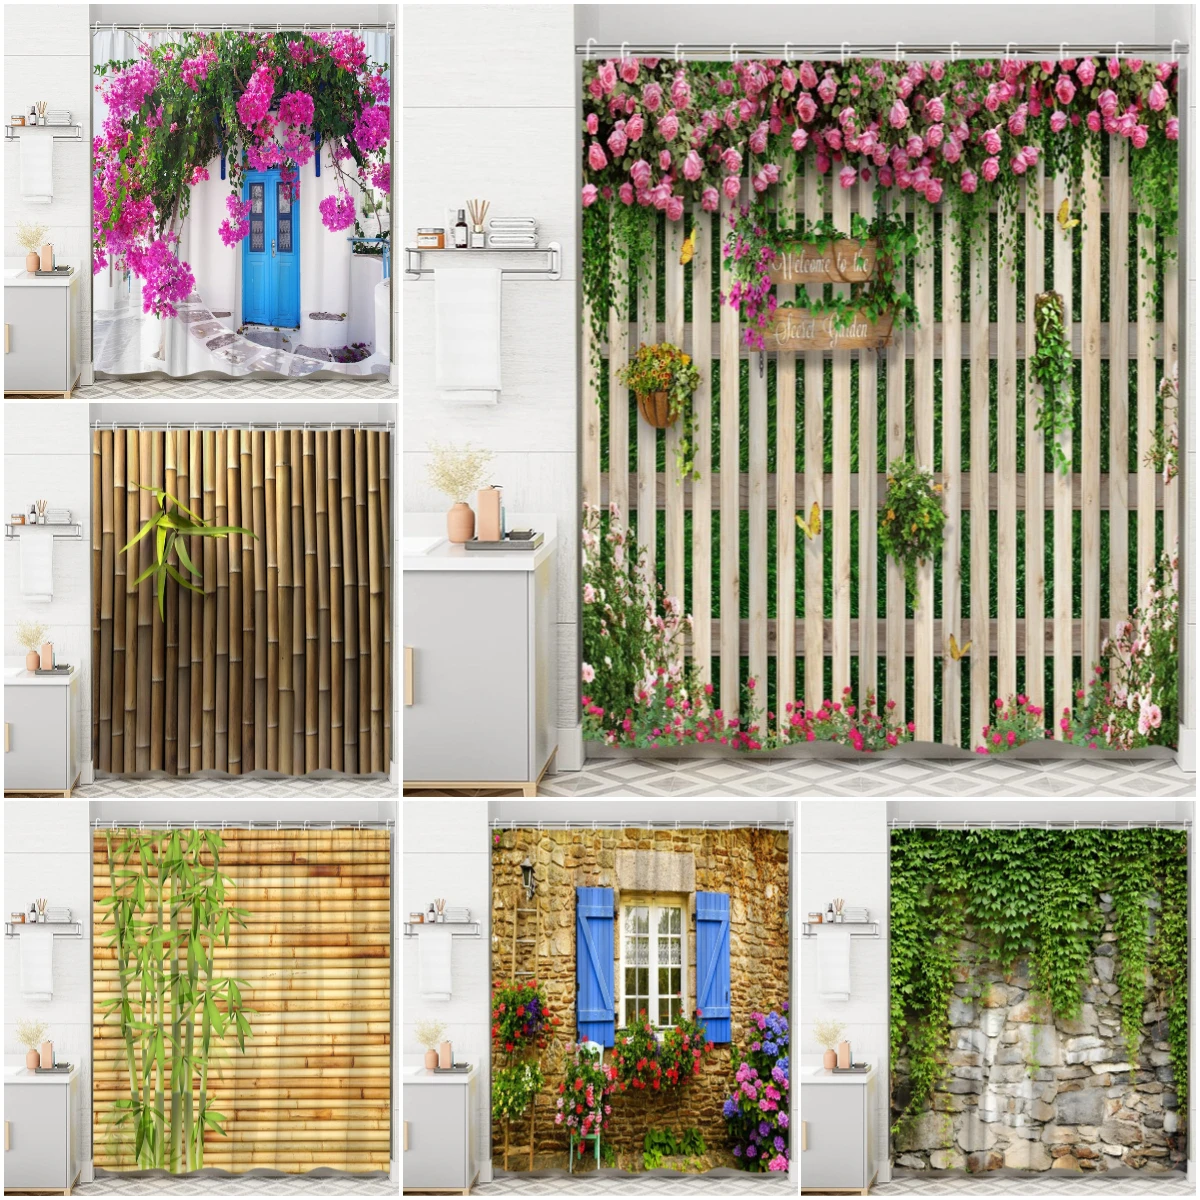 Flower Wall Shower Curtain, Street View Spring Greenery Vines Bamboo Farm Brick Wall Home Bathroom Decor with Hooks 5mp ip camera security cctv outdoor wall amount rj45 wifi wireless external waterproof ip66 nvr onvif protocol ptz 360° view